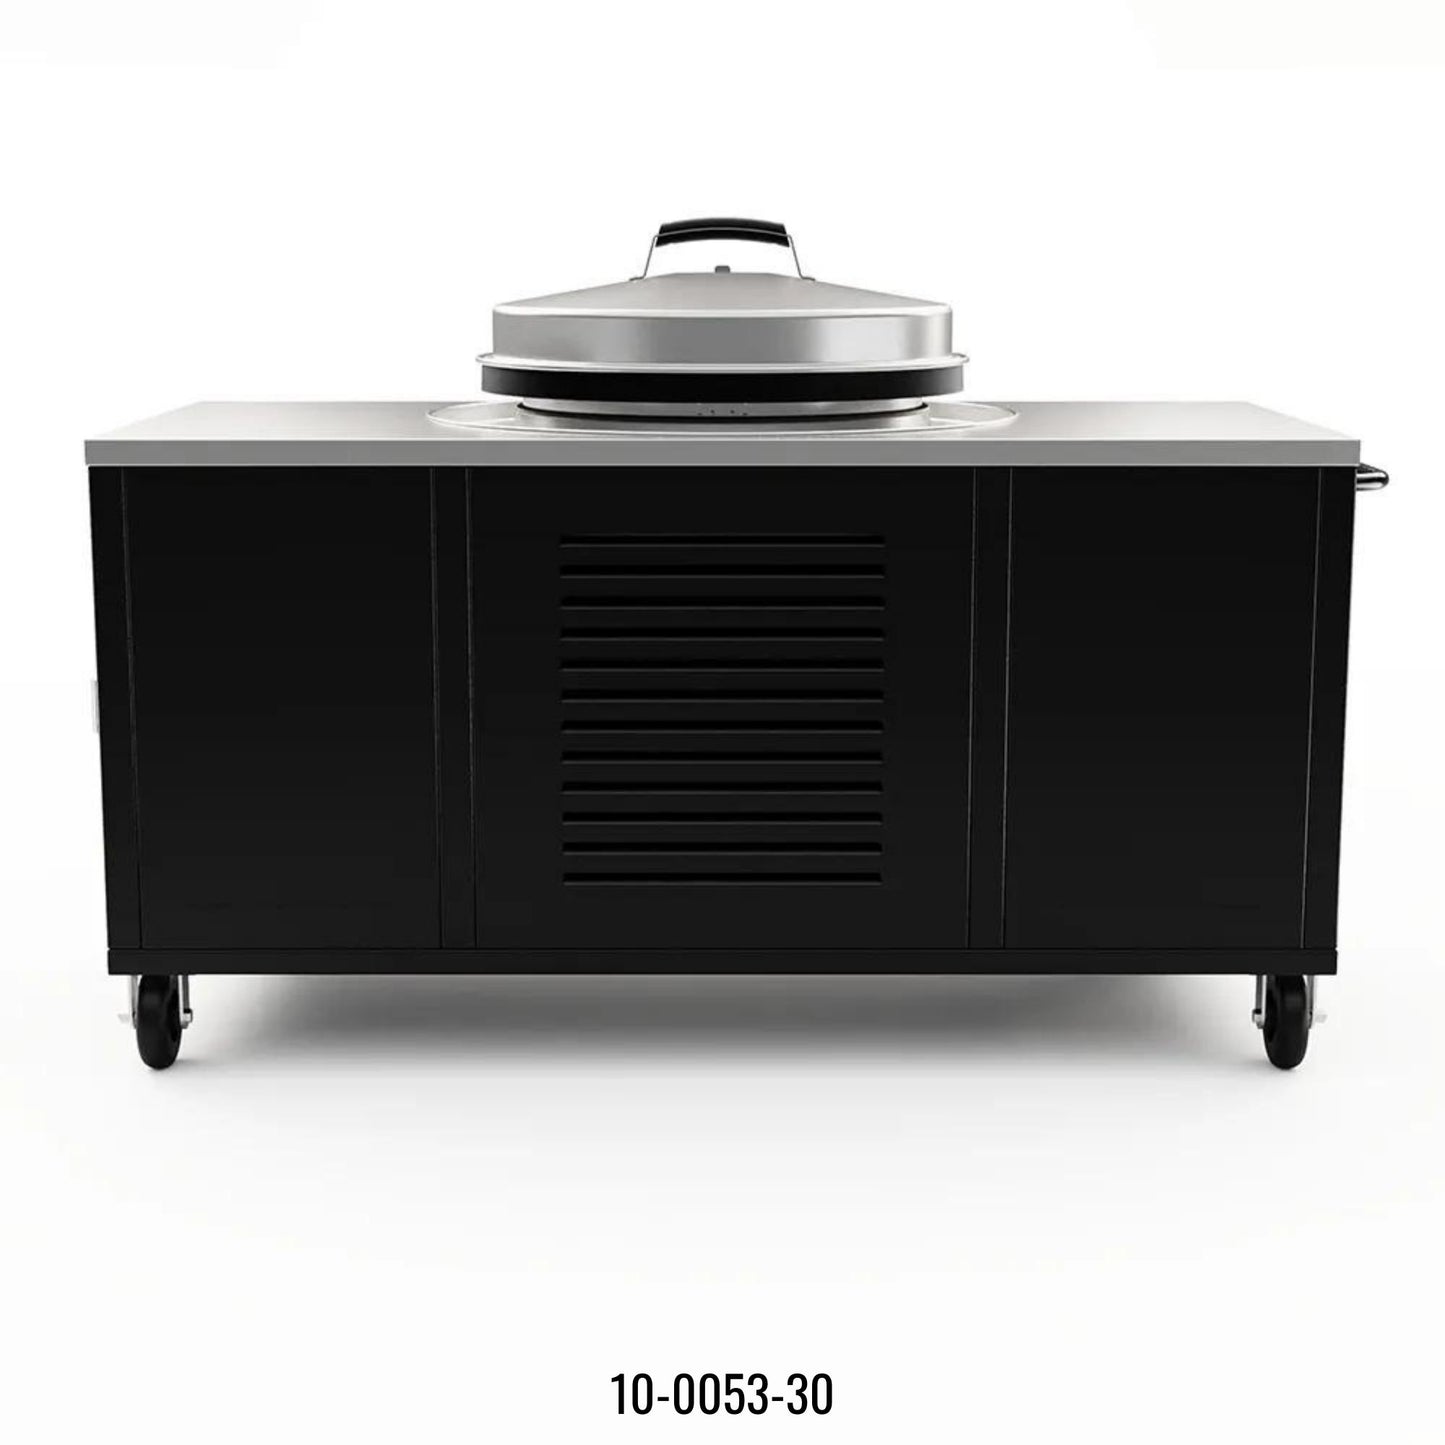 EVO GRILL CART FOR AFFINITY 30G - CONVERTS DROP-IN MODEL TO A FREE STANDING GRILL(CART ONLY)